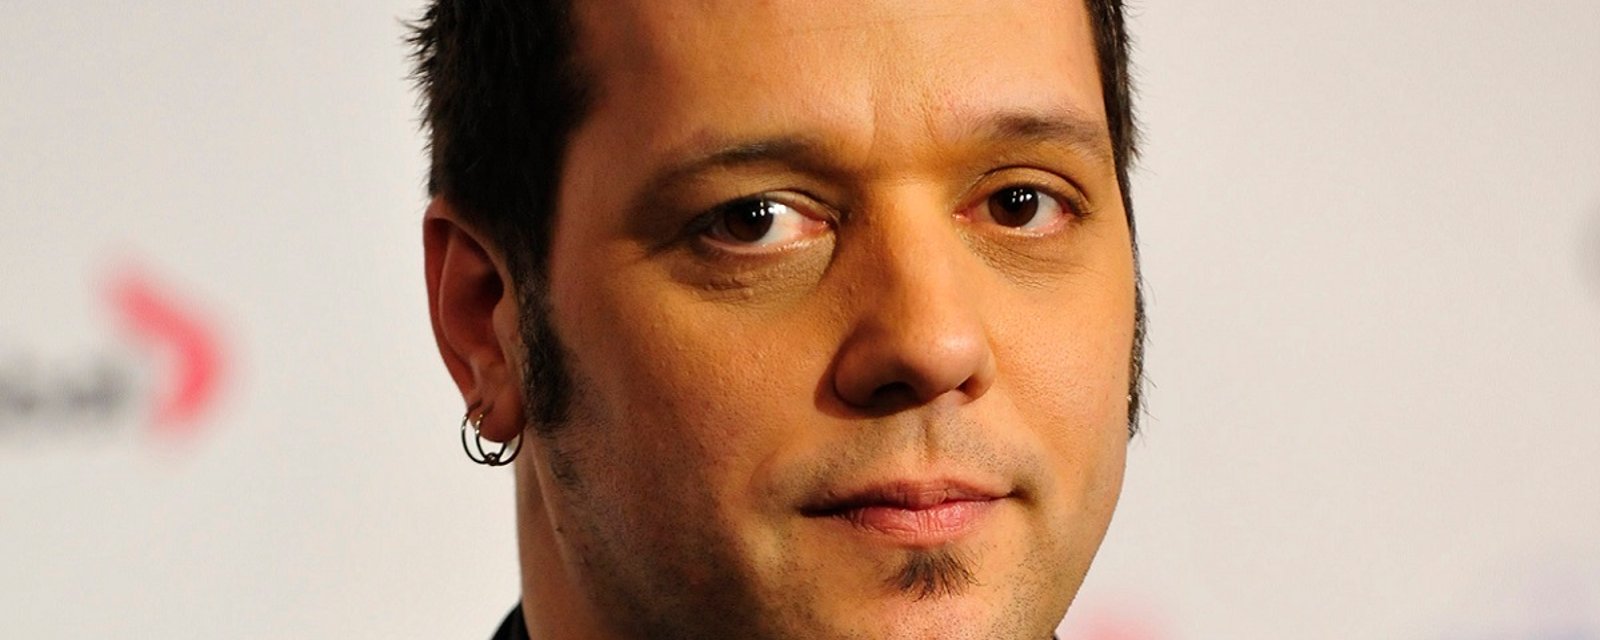 Breaking: Dead body found in home of NHL analyst George Stroumboulopoulos